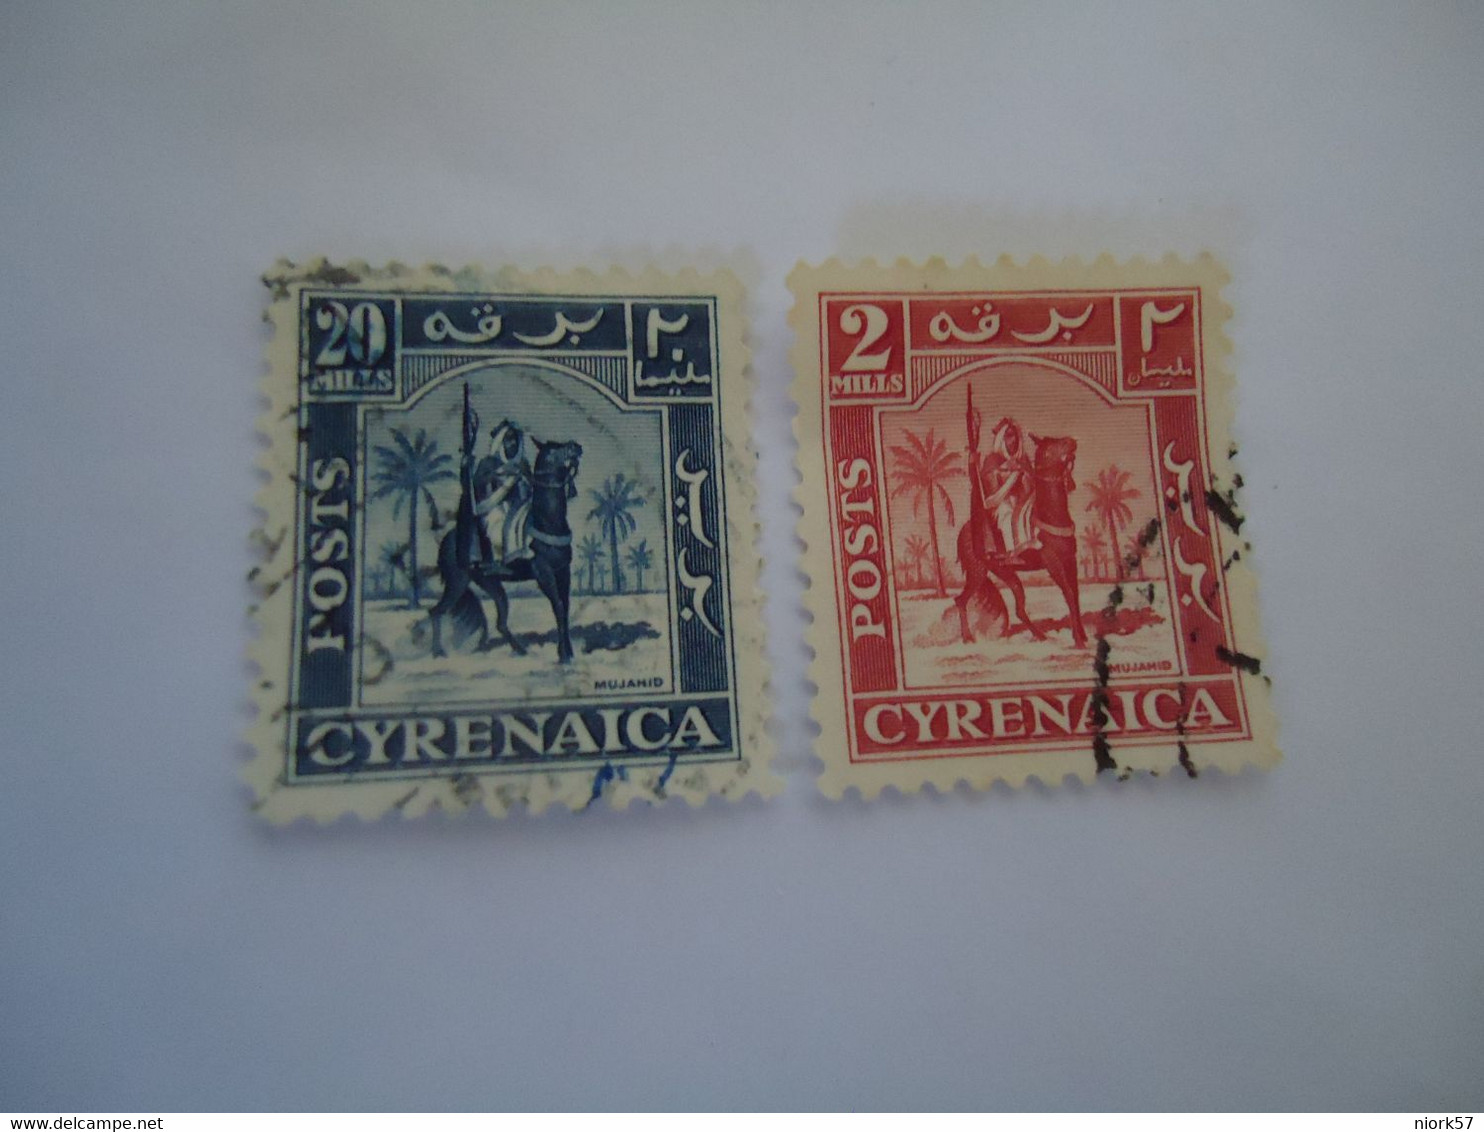 CYRENAICA LIBYA USED 2STAMPS SOLDIER ON HORSHES - Cirenaica